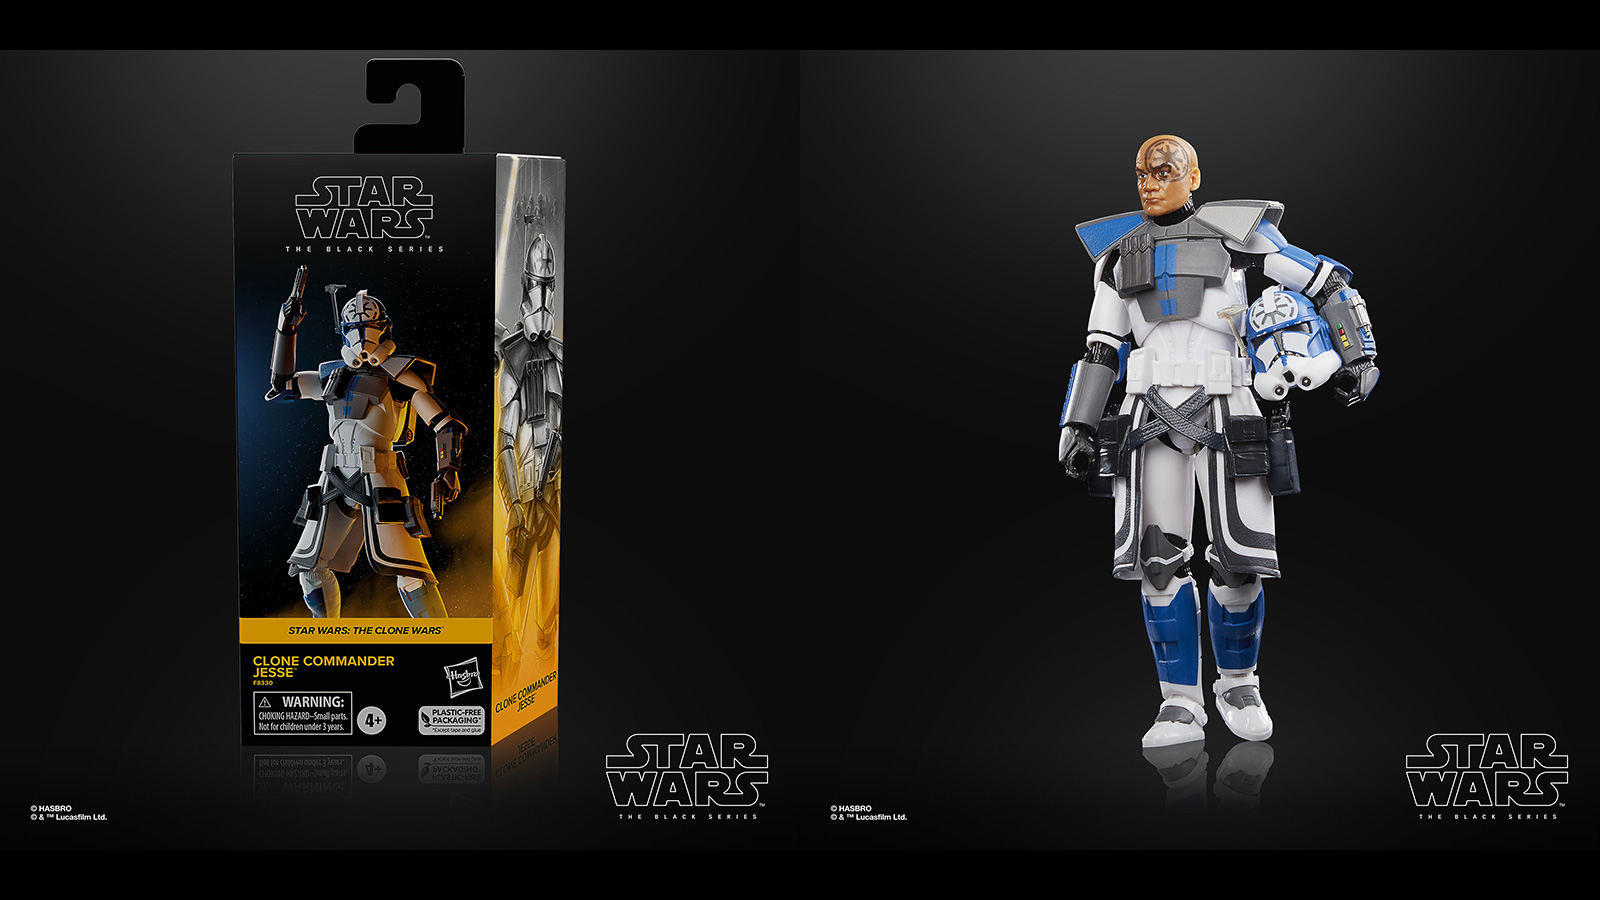 Preorder Walmart’s Exclusive The Black Series 6-Inch Clone Commander Jesse figure - With Link